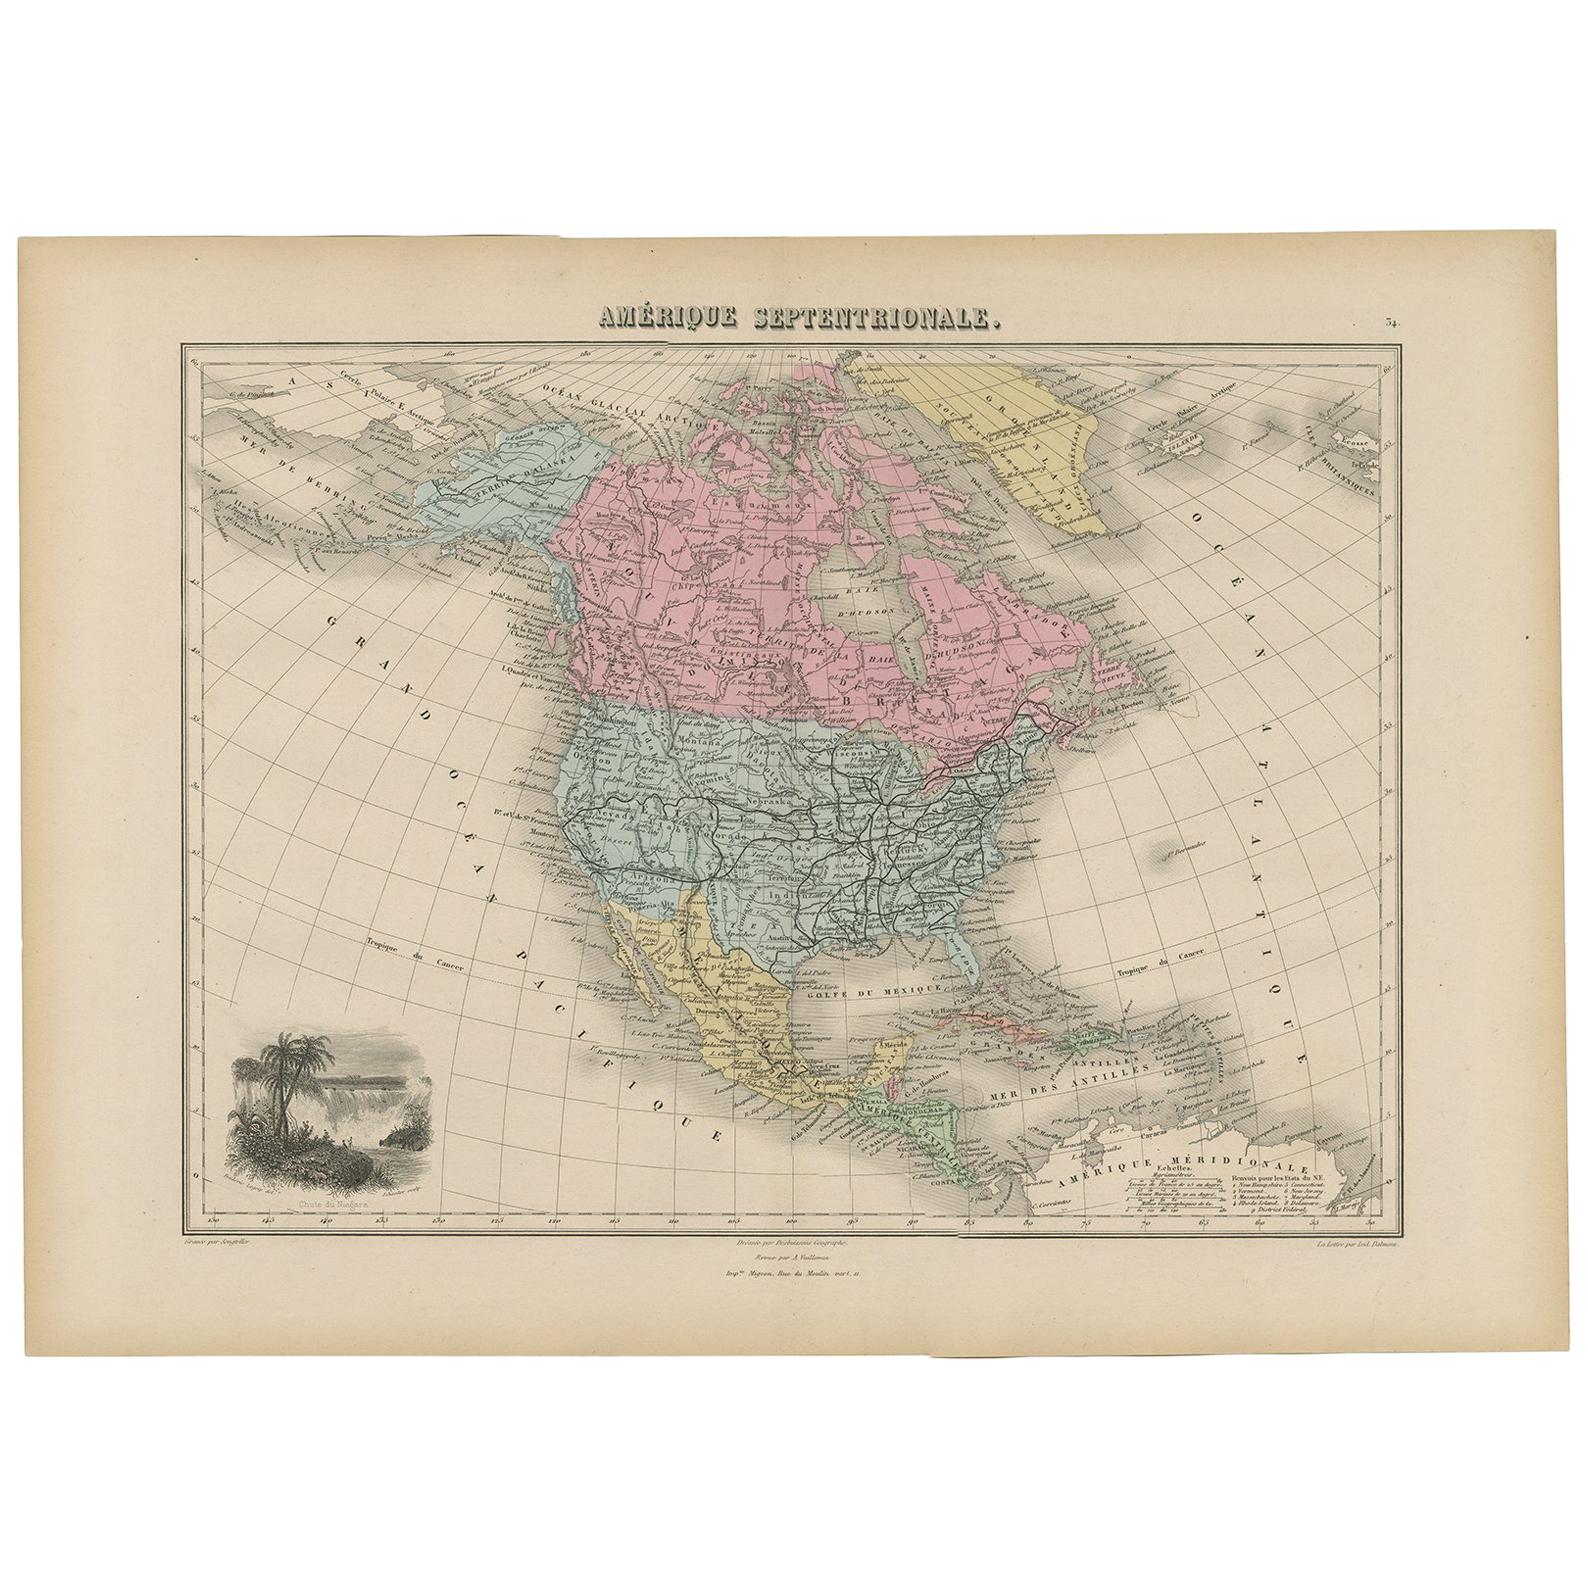 Antique Map of North and Central America by Migeon '1880'